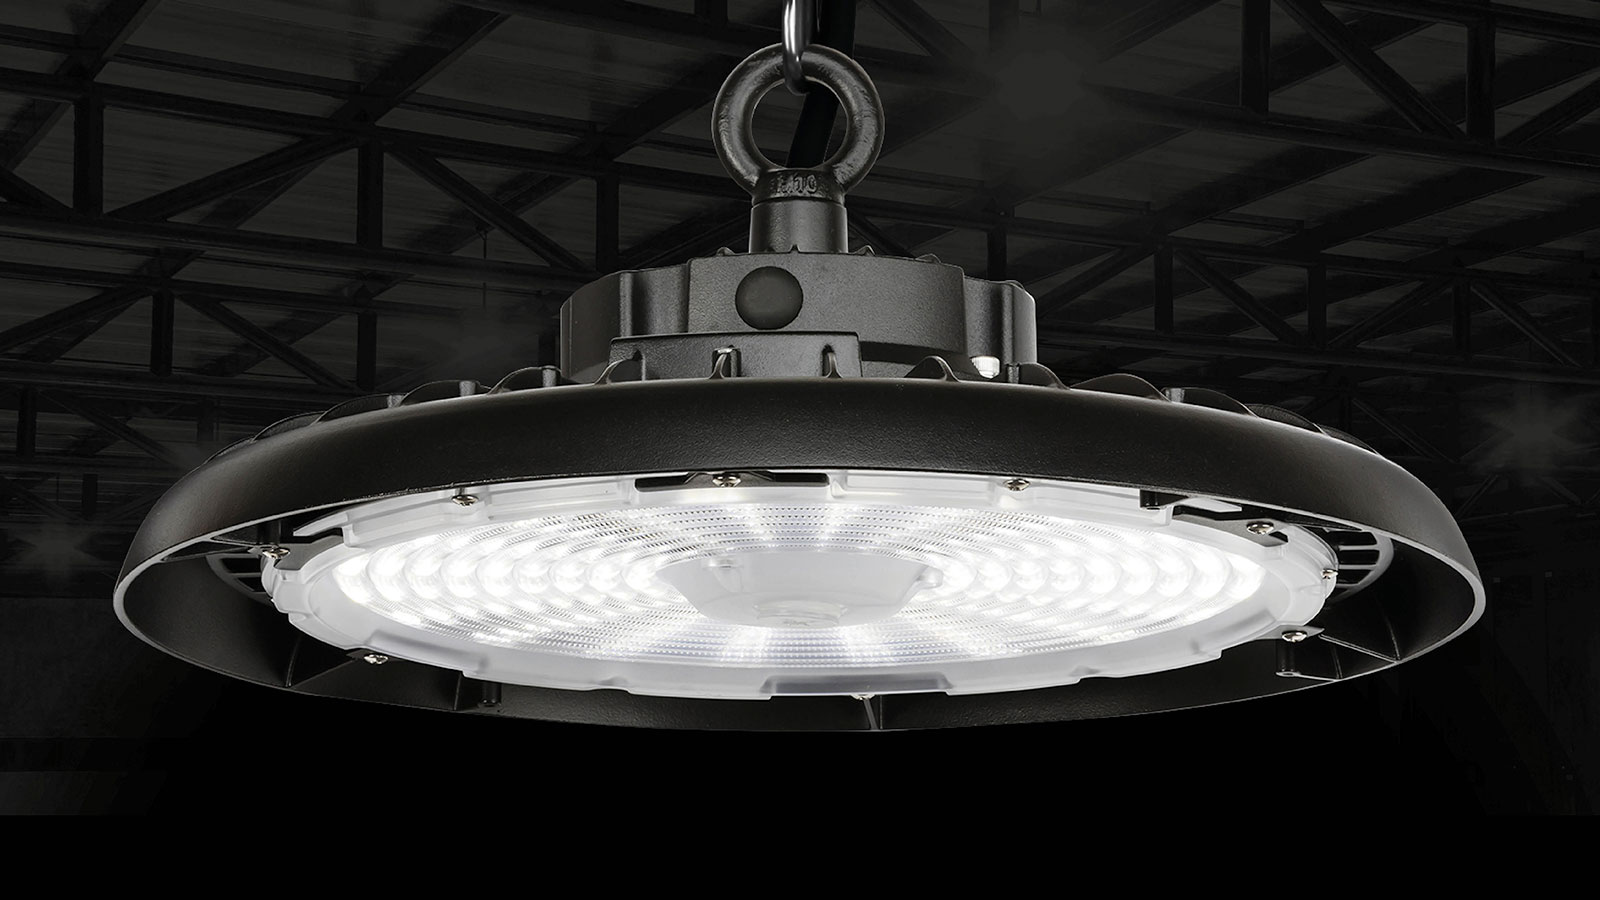 Knightsbridge reaches new highs with Potentia LED industrial lighting